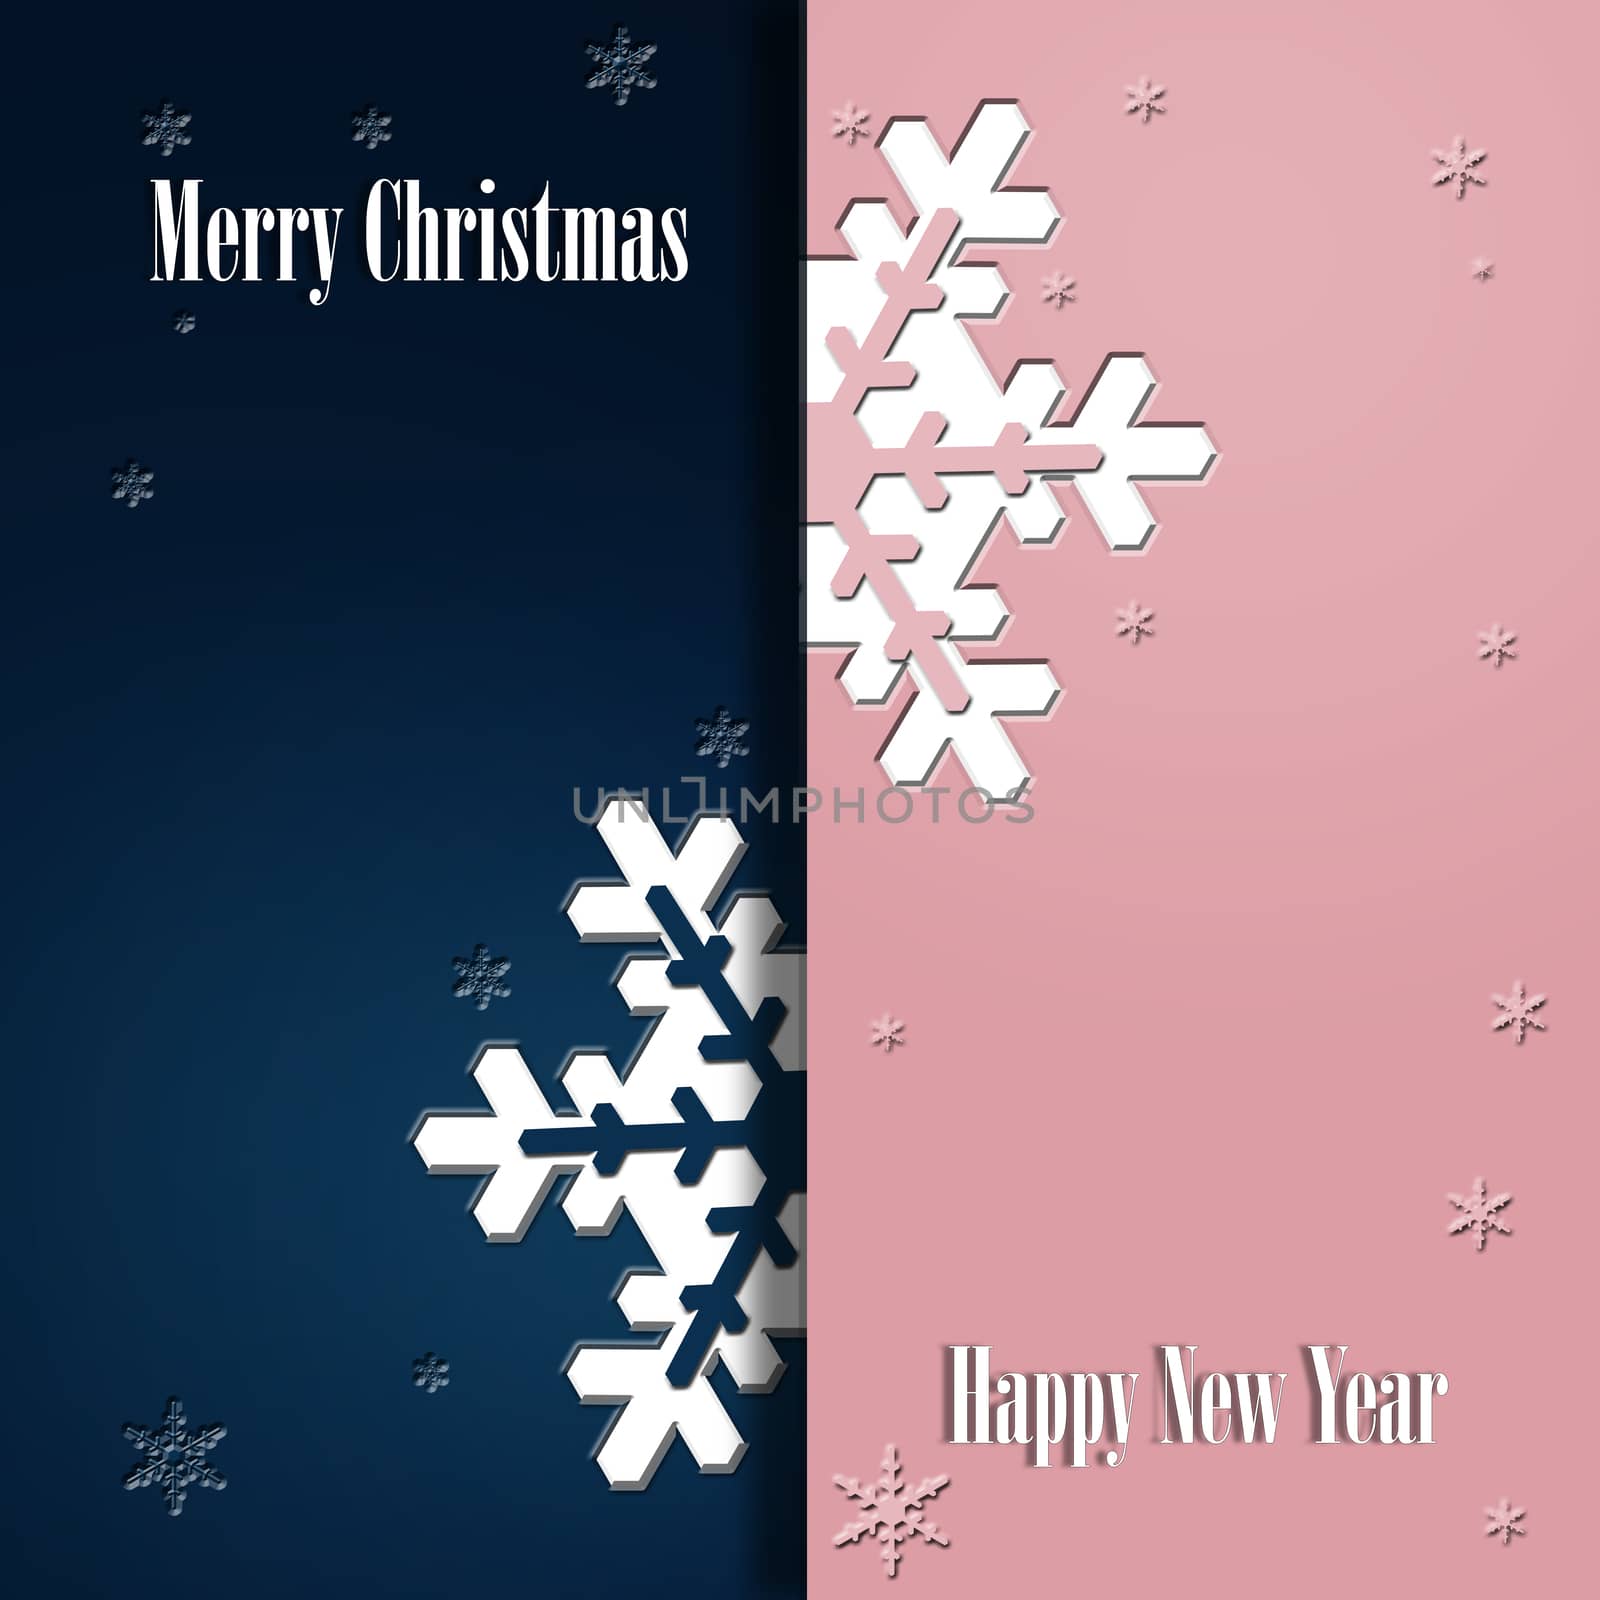 Minimalist Christmas Poster Template in dark blue, trendy romantic pink Color with white snowflakes. Text Merry Christmas and Happy New Year. Luxury, Elegant, Modern Style. 3D illustration